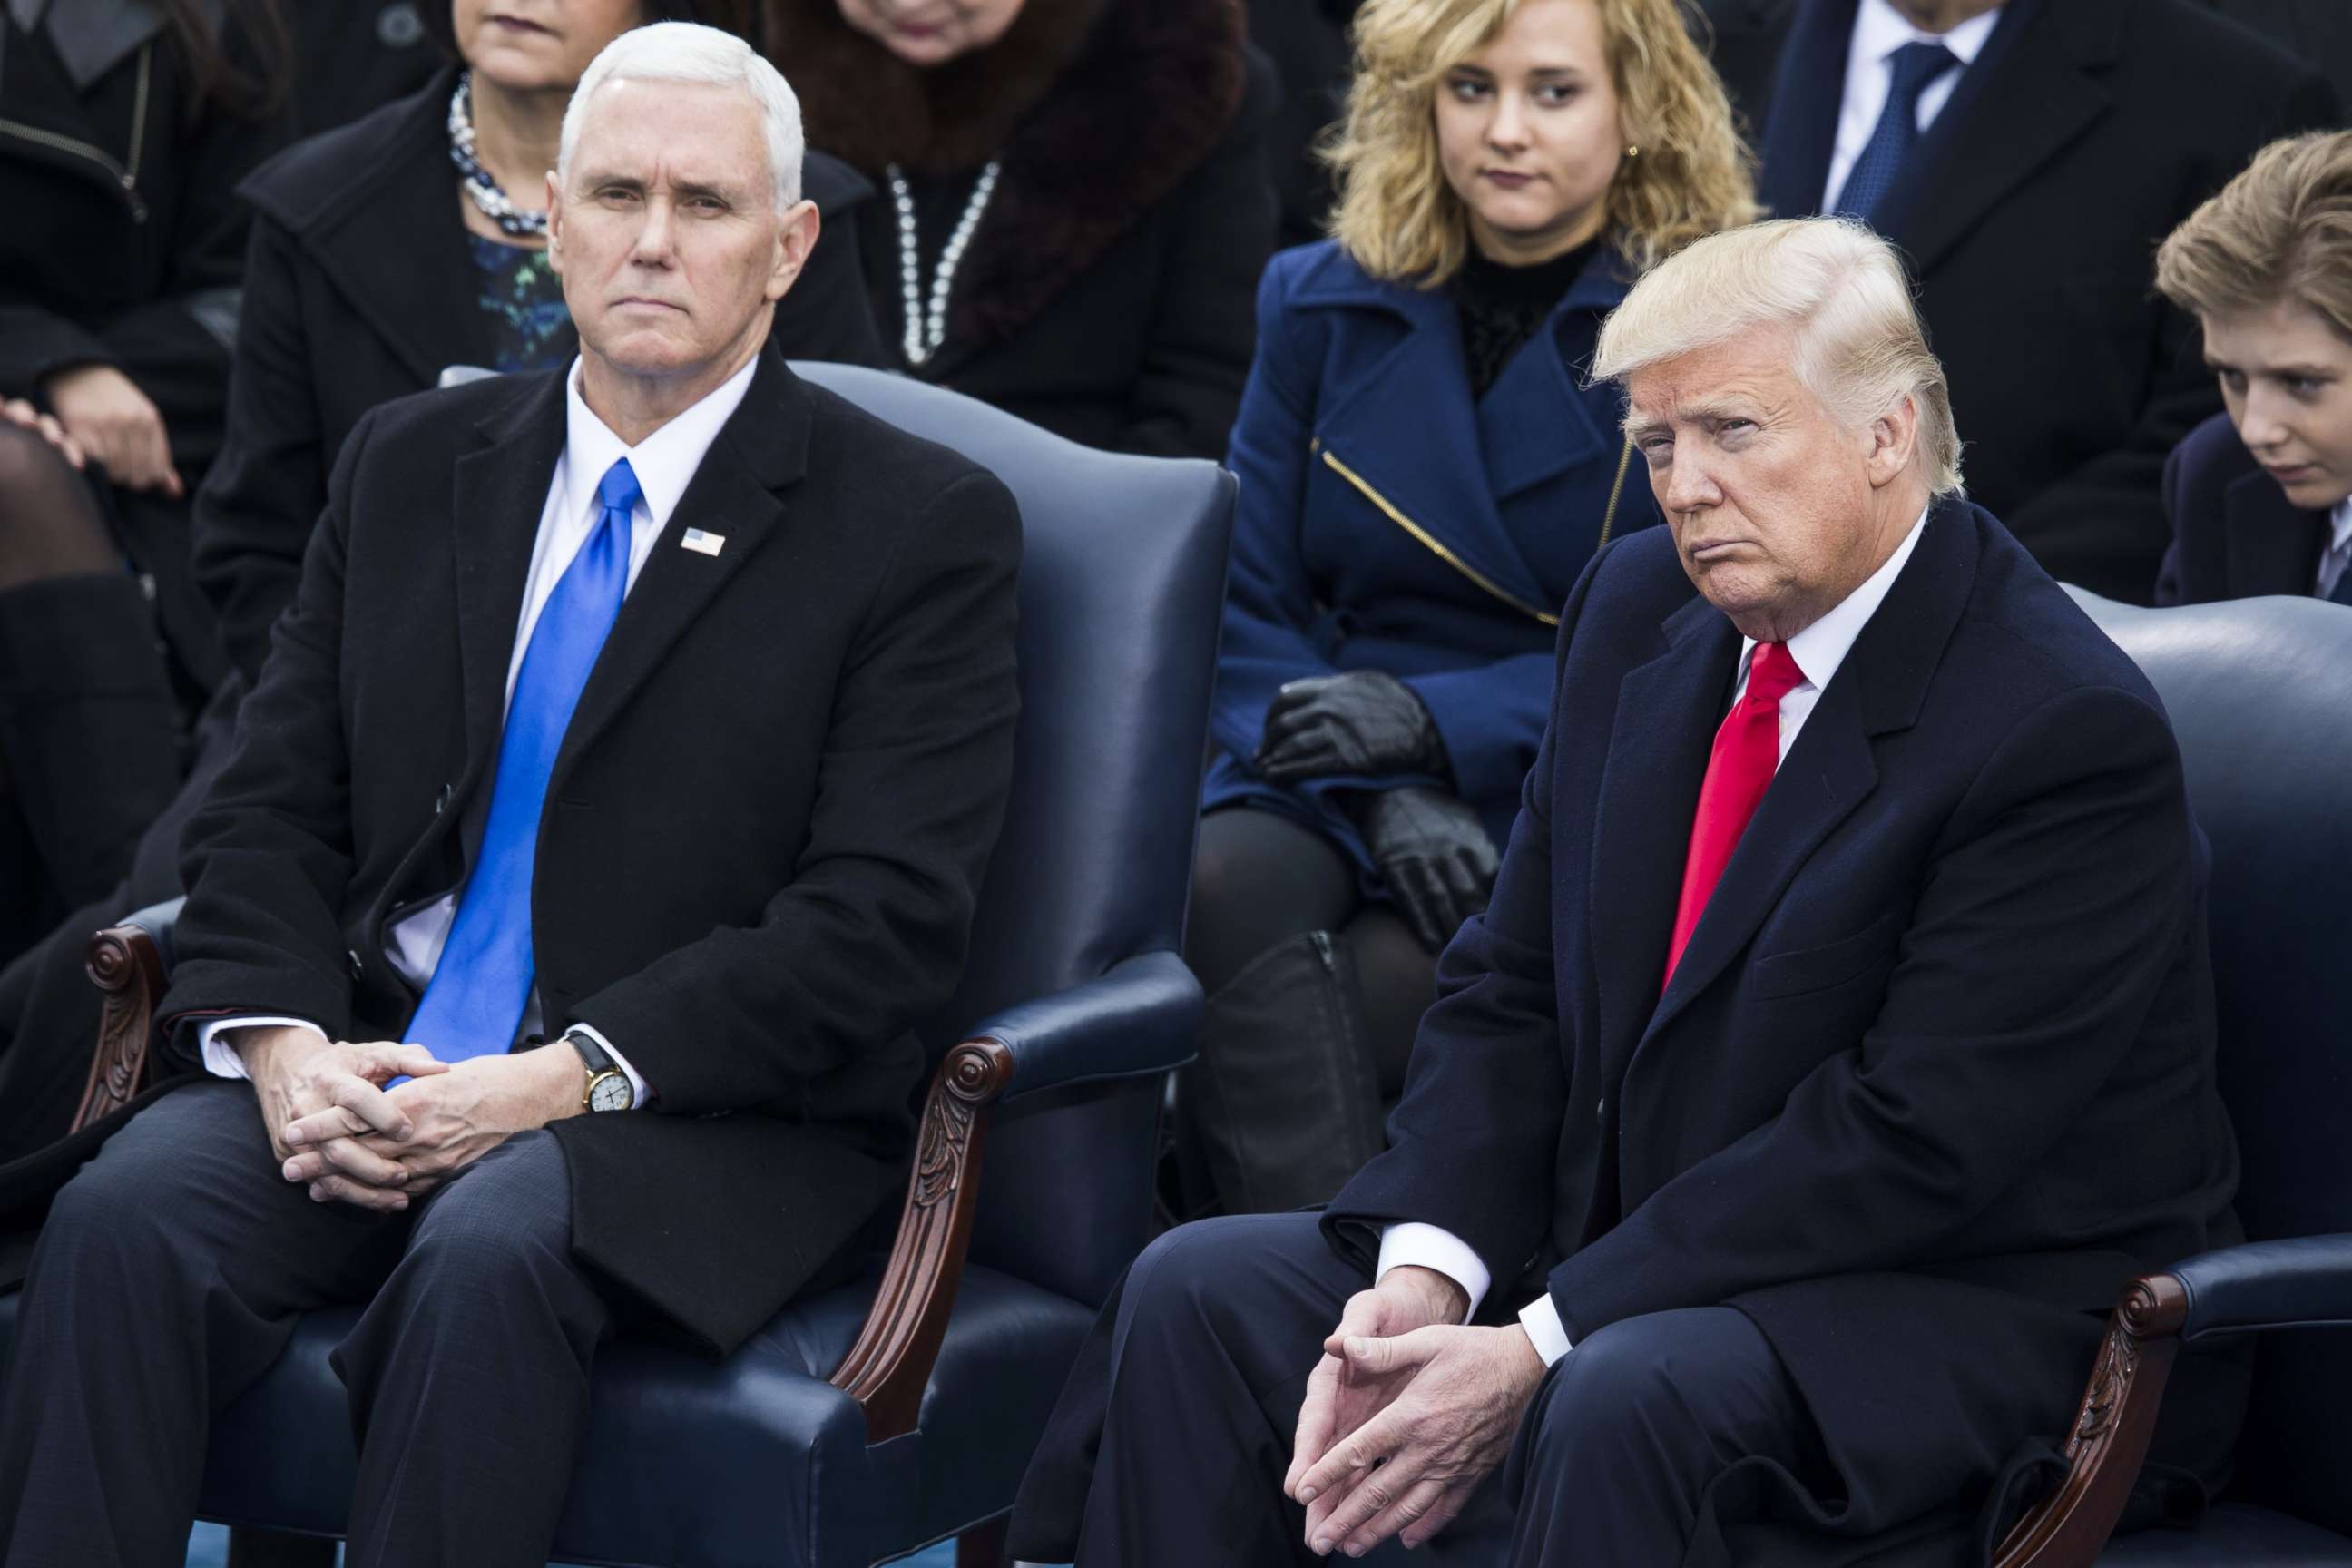 PHOTO: President-elect Donald Trump and Vice President-elect Mike Pence during the 58th U.S. Presidential Inauguration in Washington, D.C.on January 20, 2017.